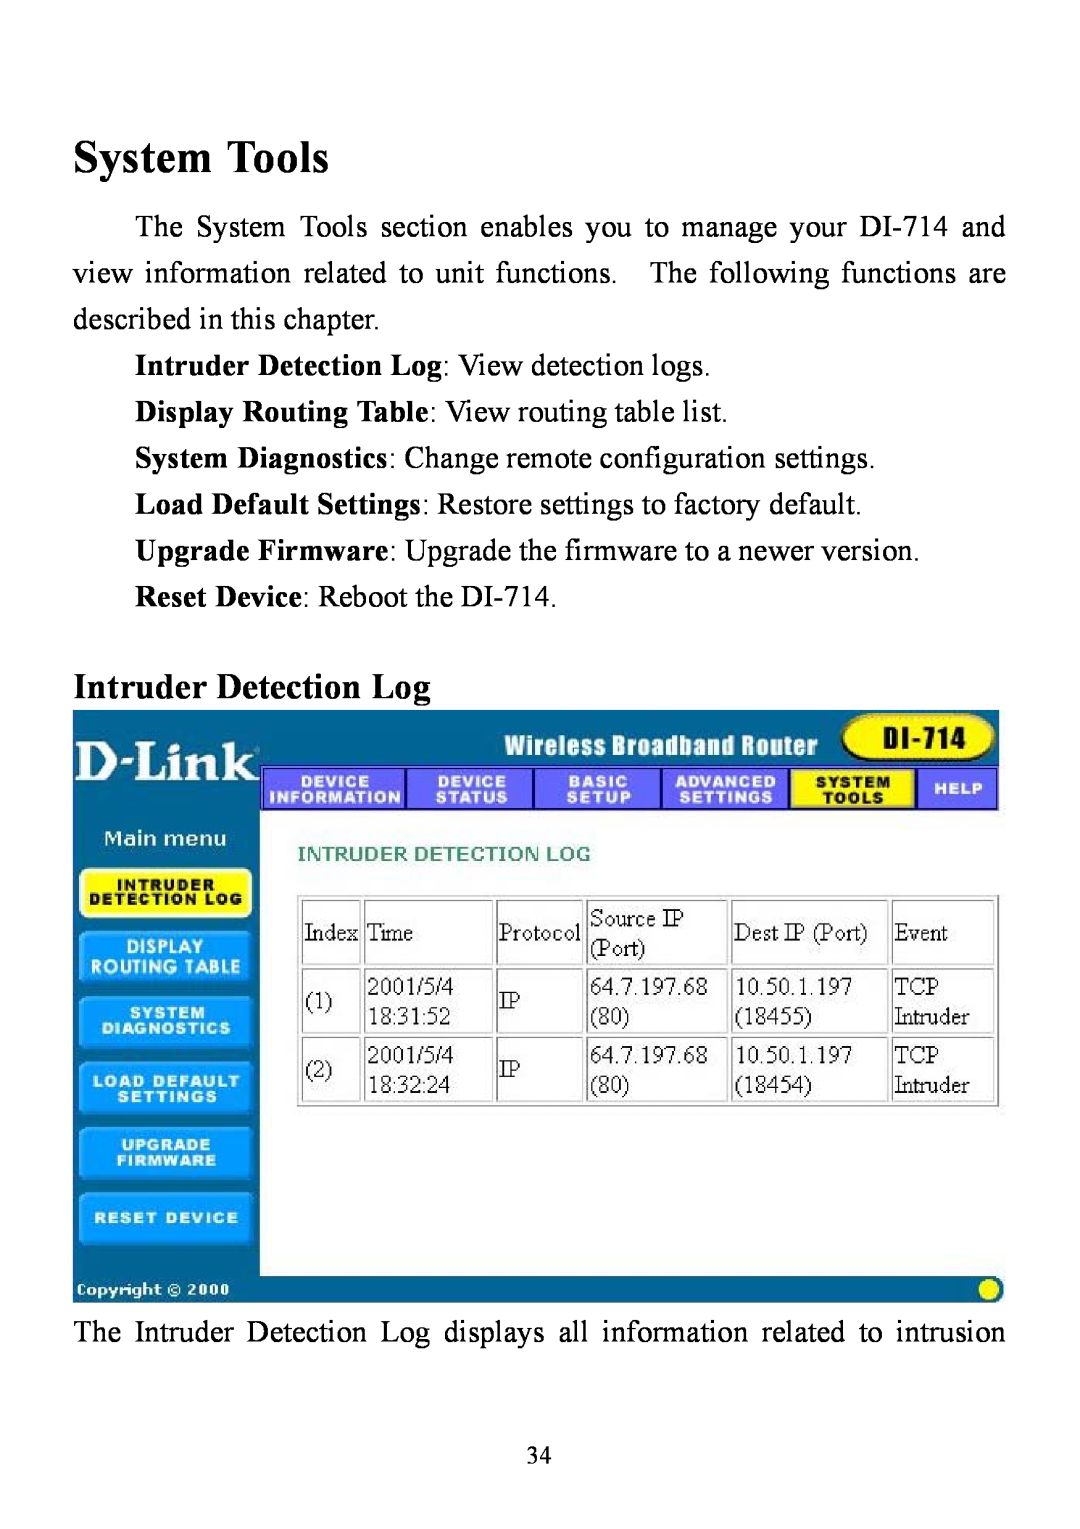 D-Link DI-714 user manual System Tools, Intruder Detection Log View detection logs 